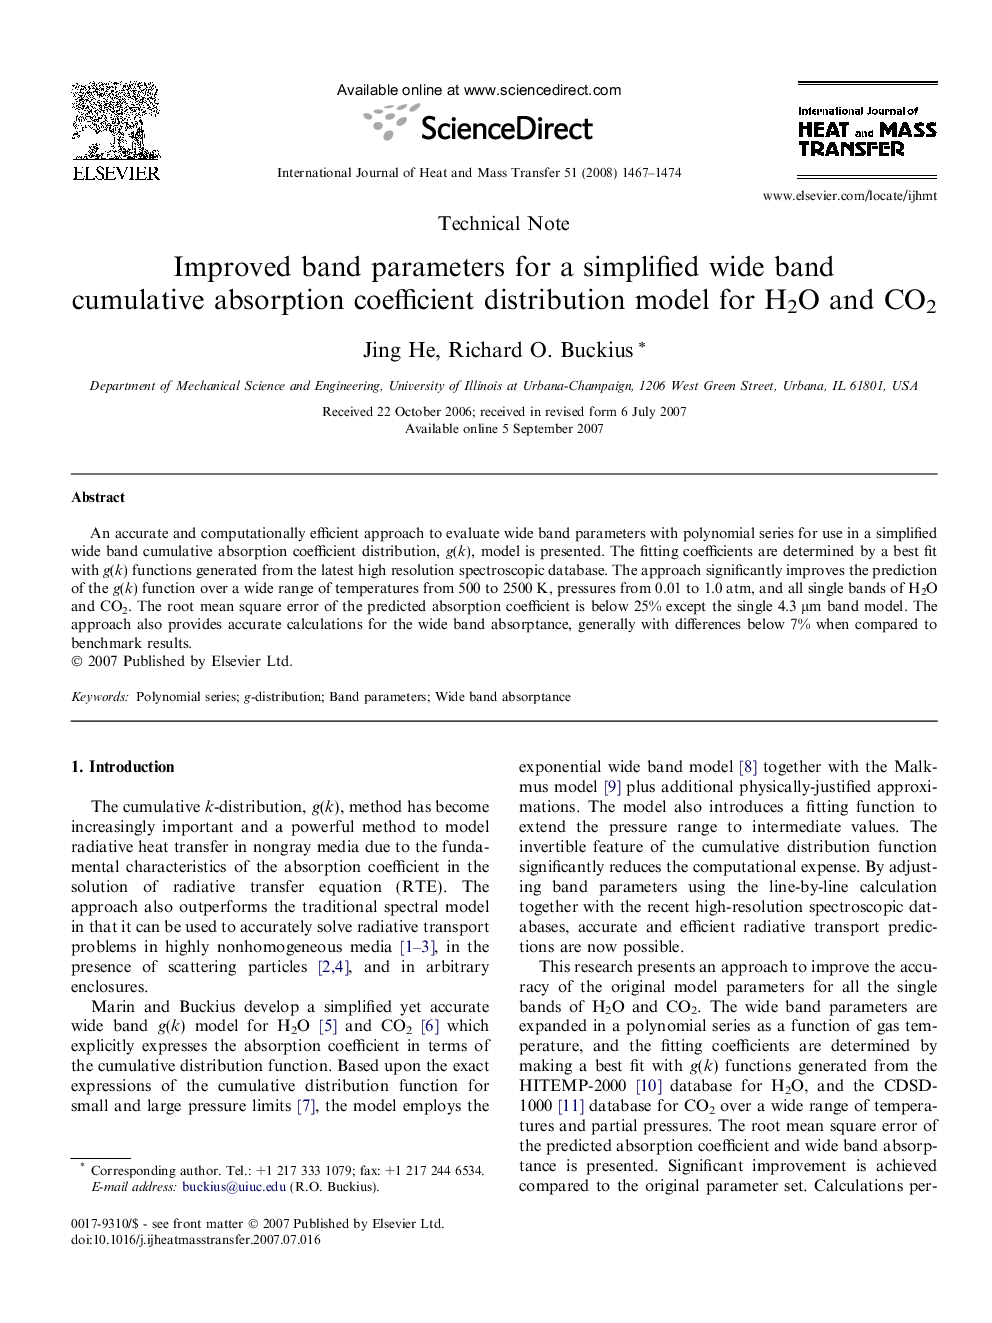 Improved band parameters for a simplified wide band cumulative absorption coefficient distribution model for H2O and CO2